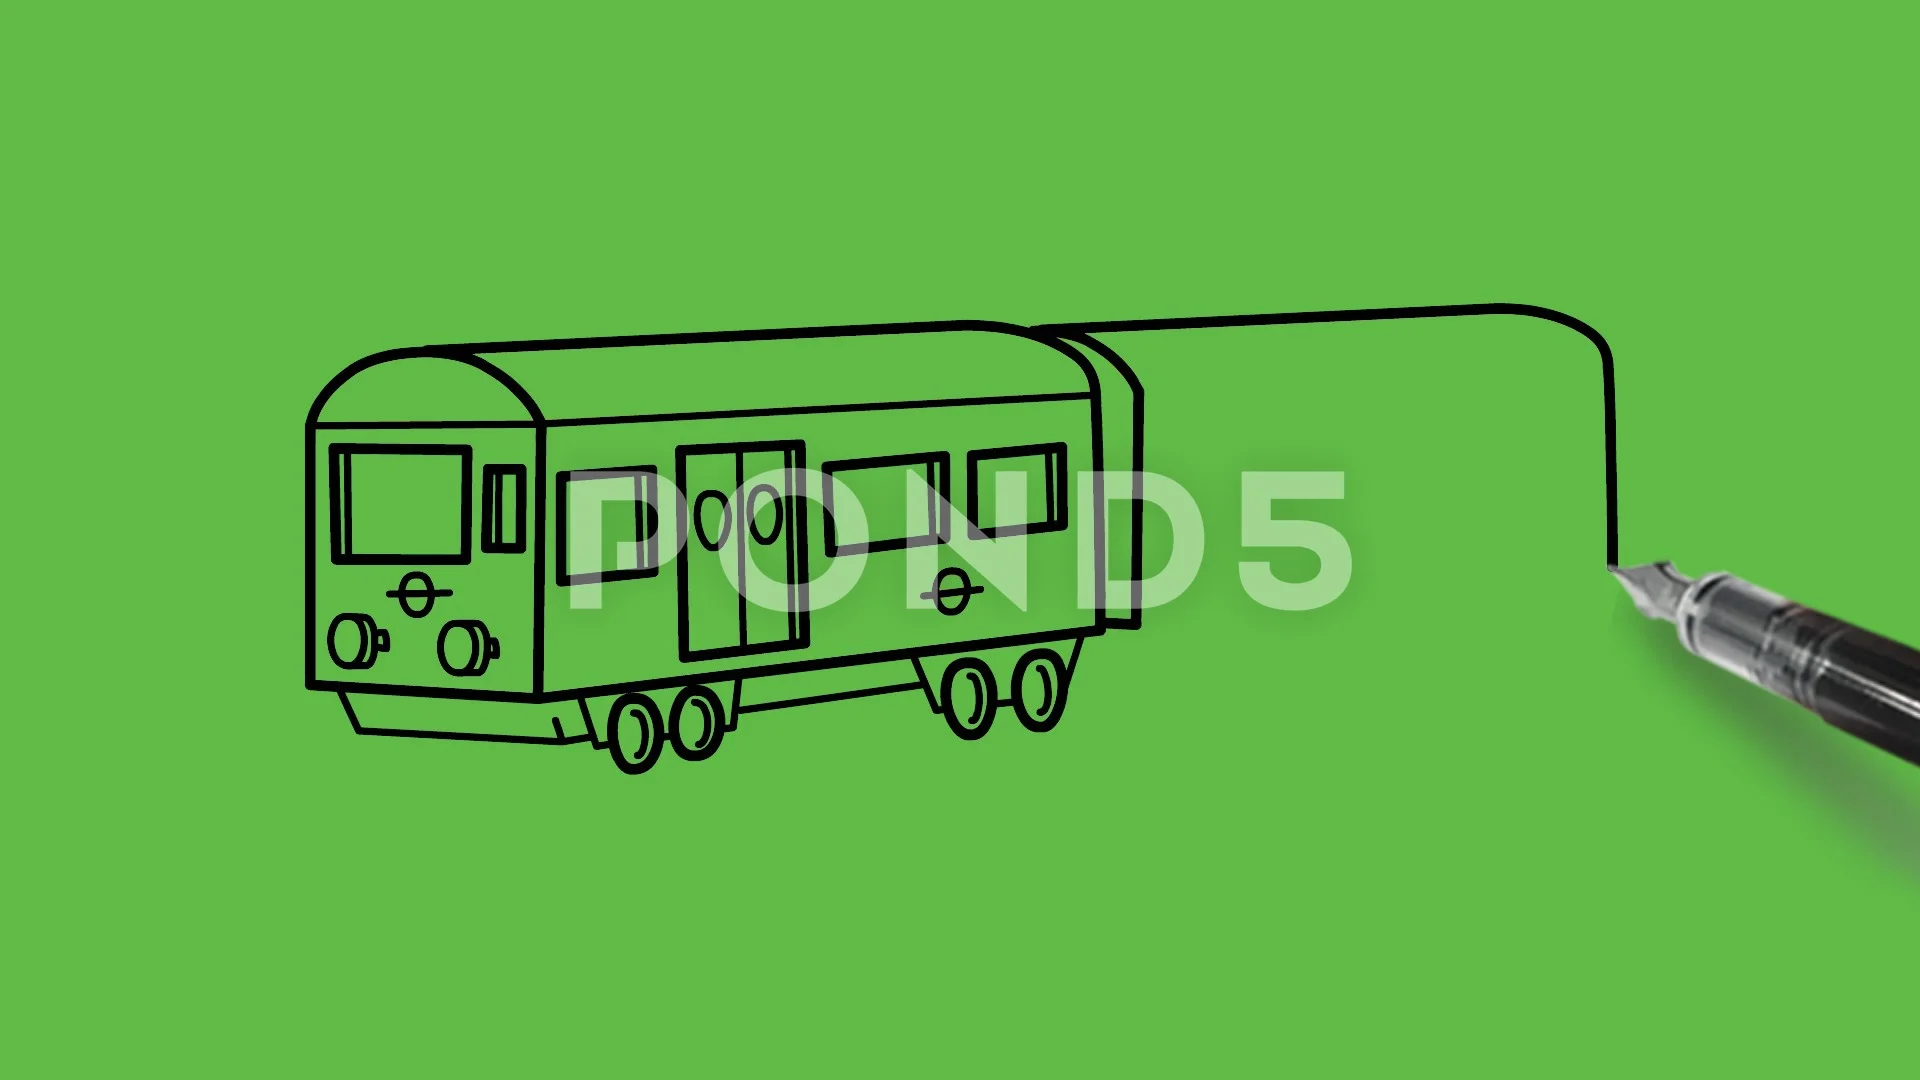 www.wikihow.com/images/thumb/0/09/Draw-a-Train-Ste...